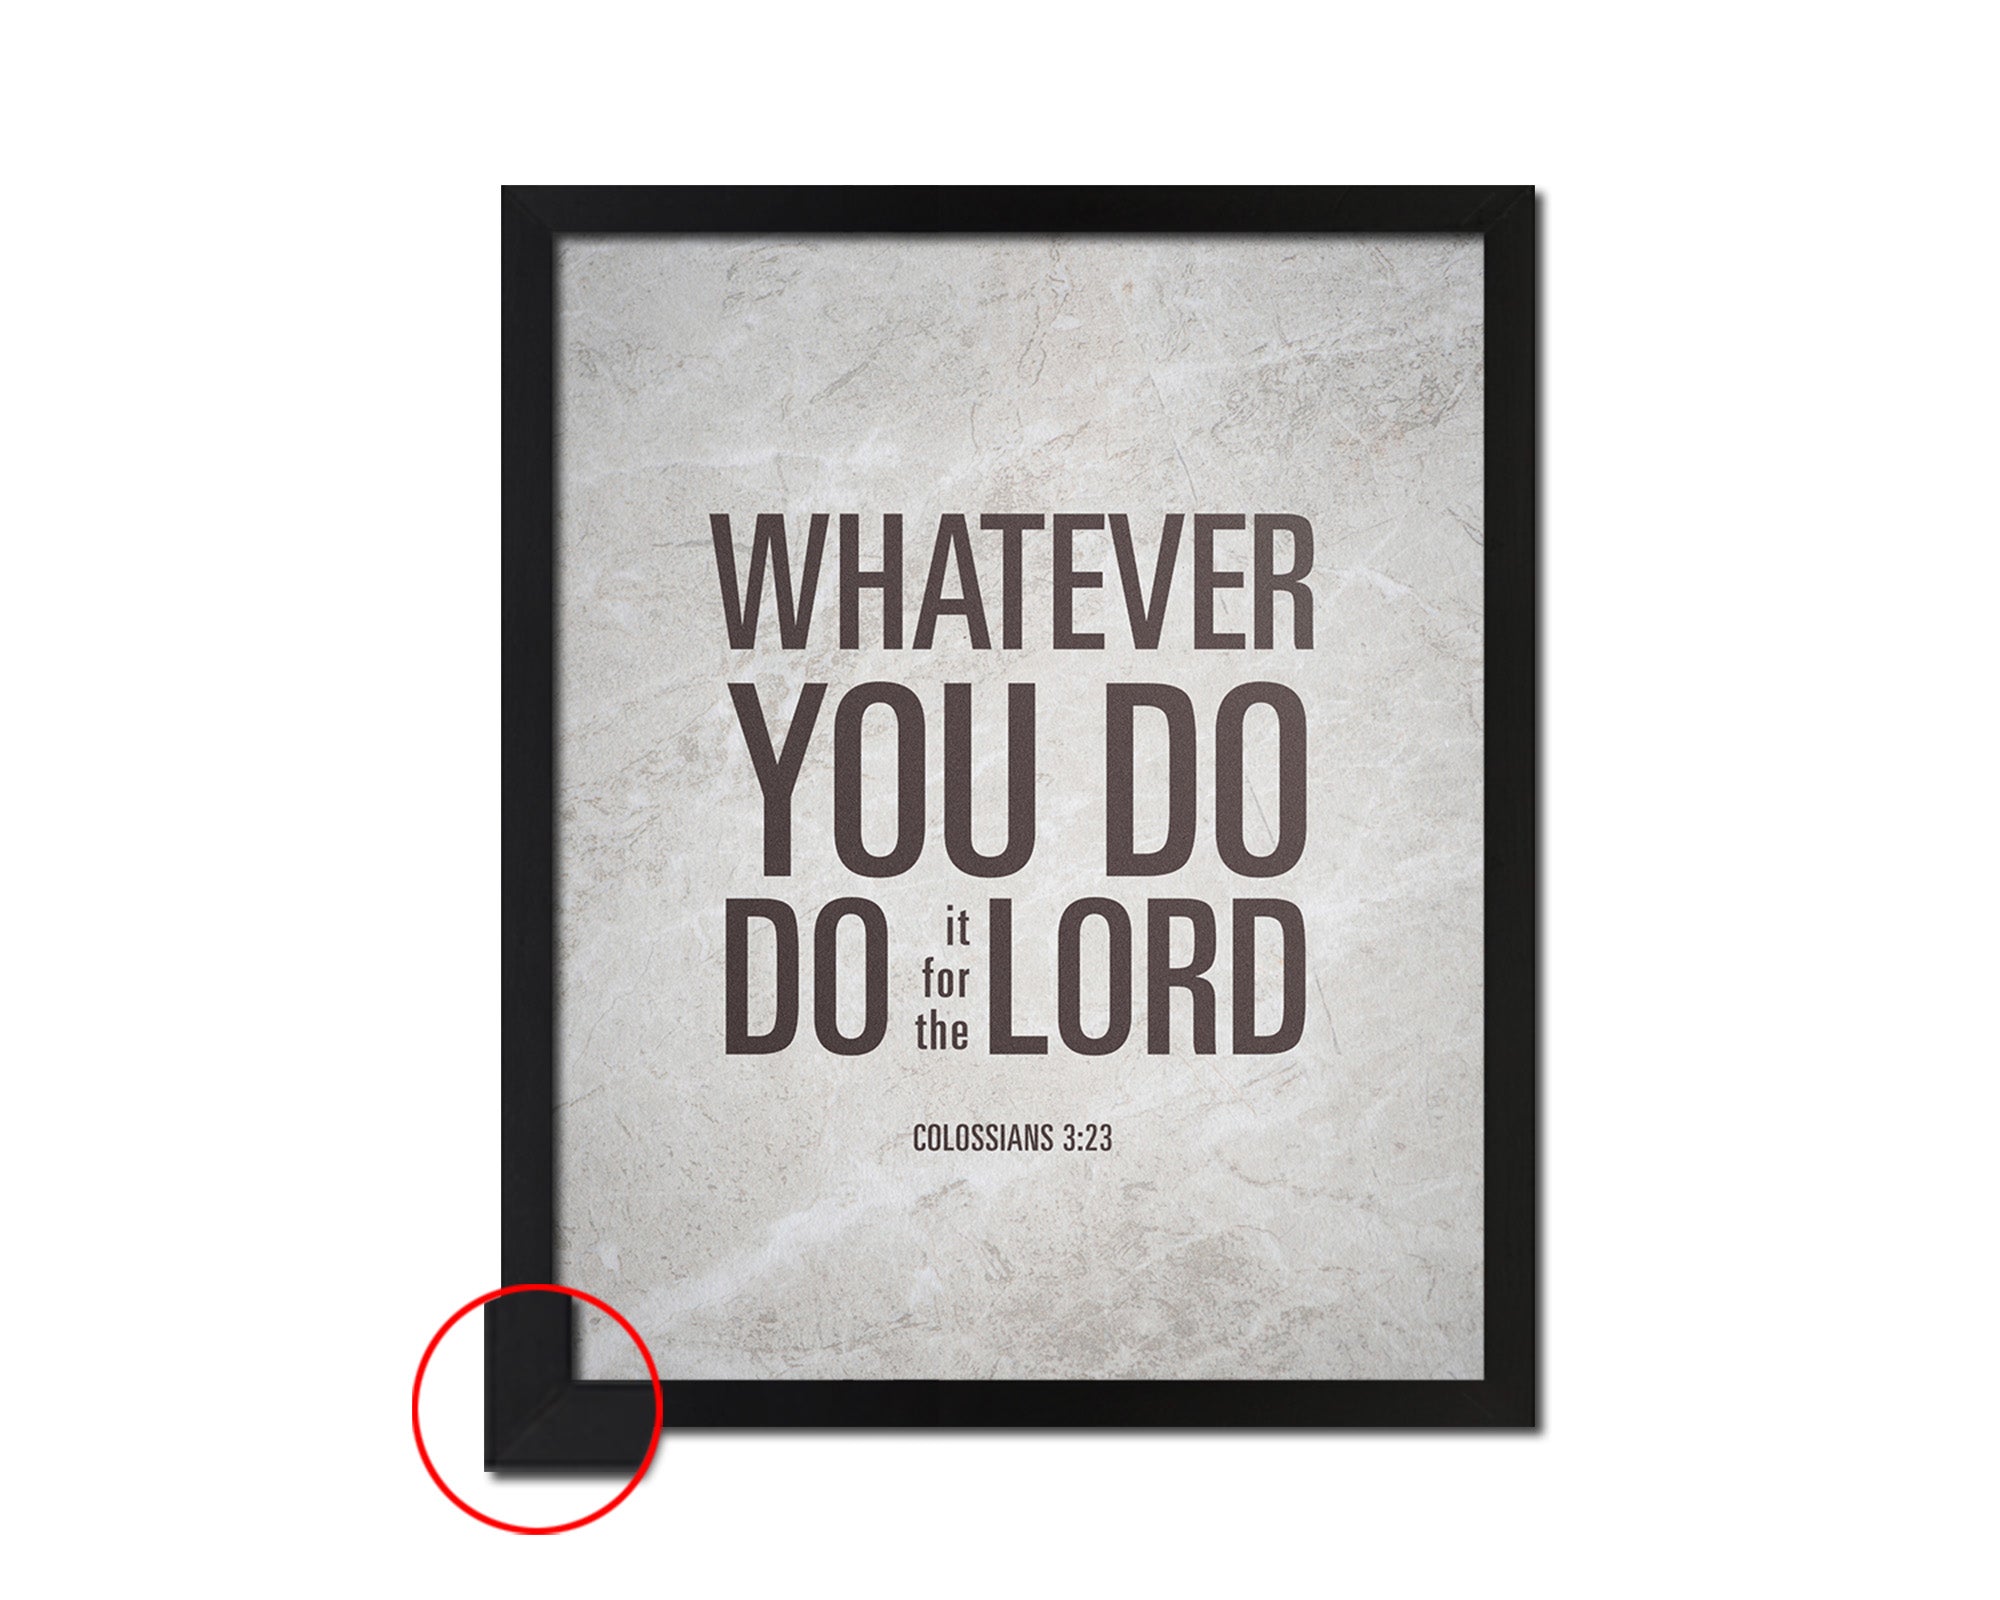 Whatever you do do it for the Lord, Colossians 3:23 Bible Verse Scripture Frame Print